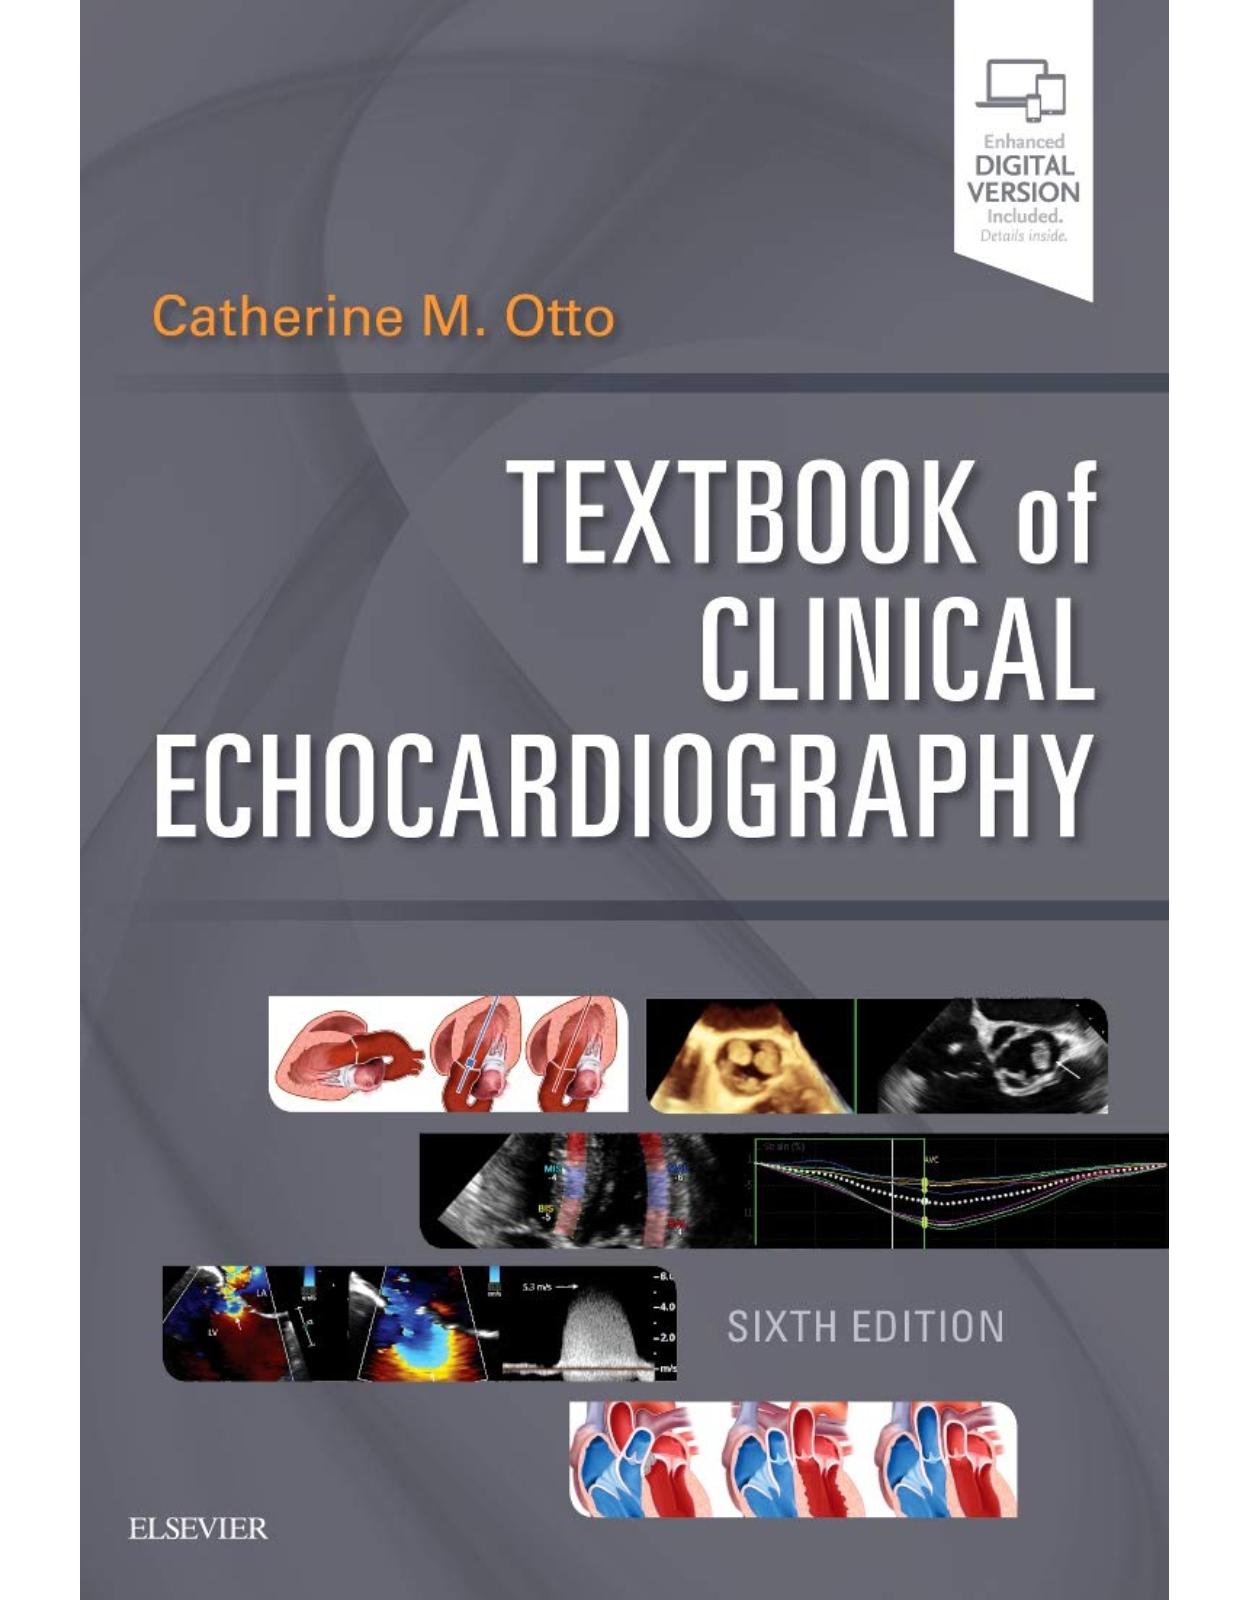 Textbook of Clinical Echocardiography, 6e 